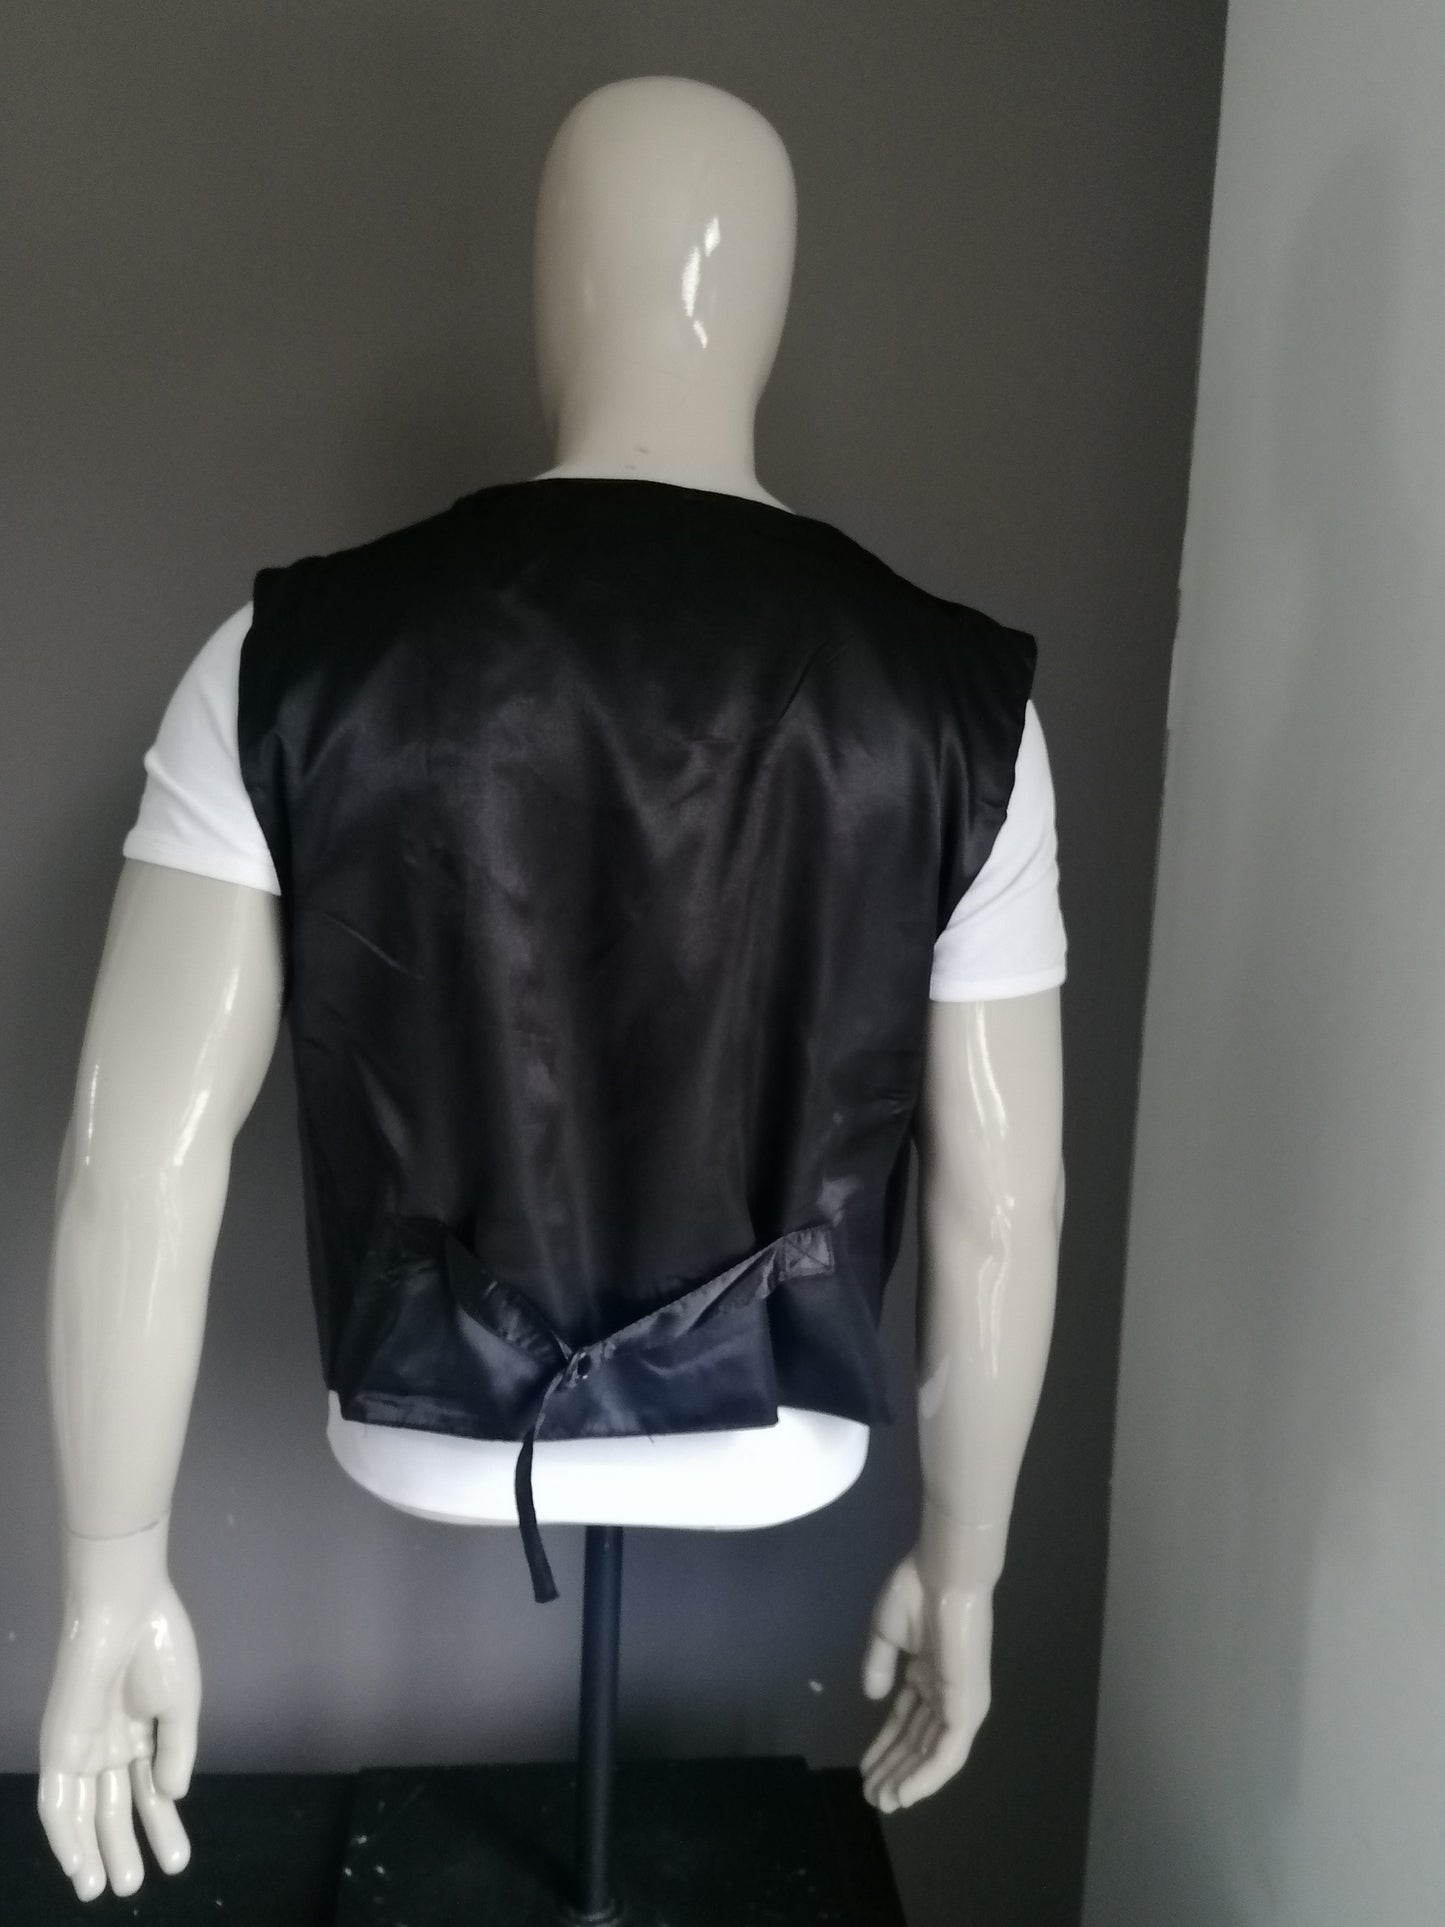 Goat leather waistcoat with press studs. Black colored. Size XL.